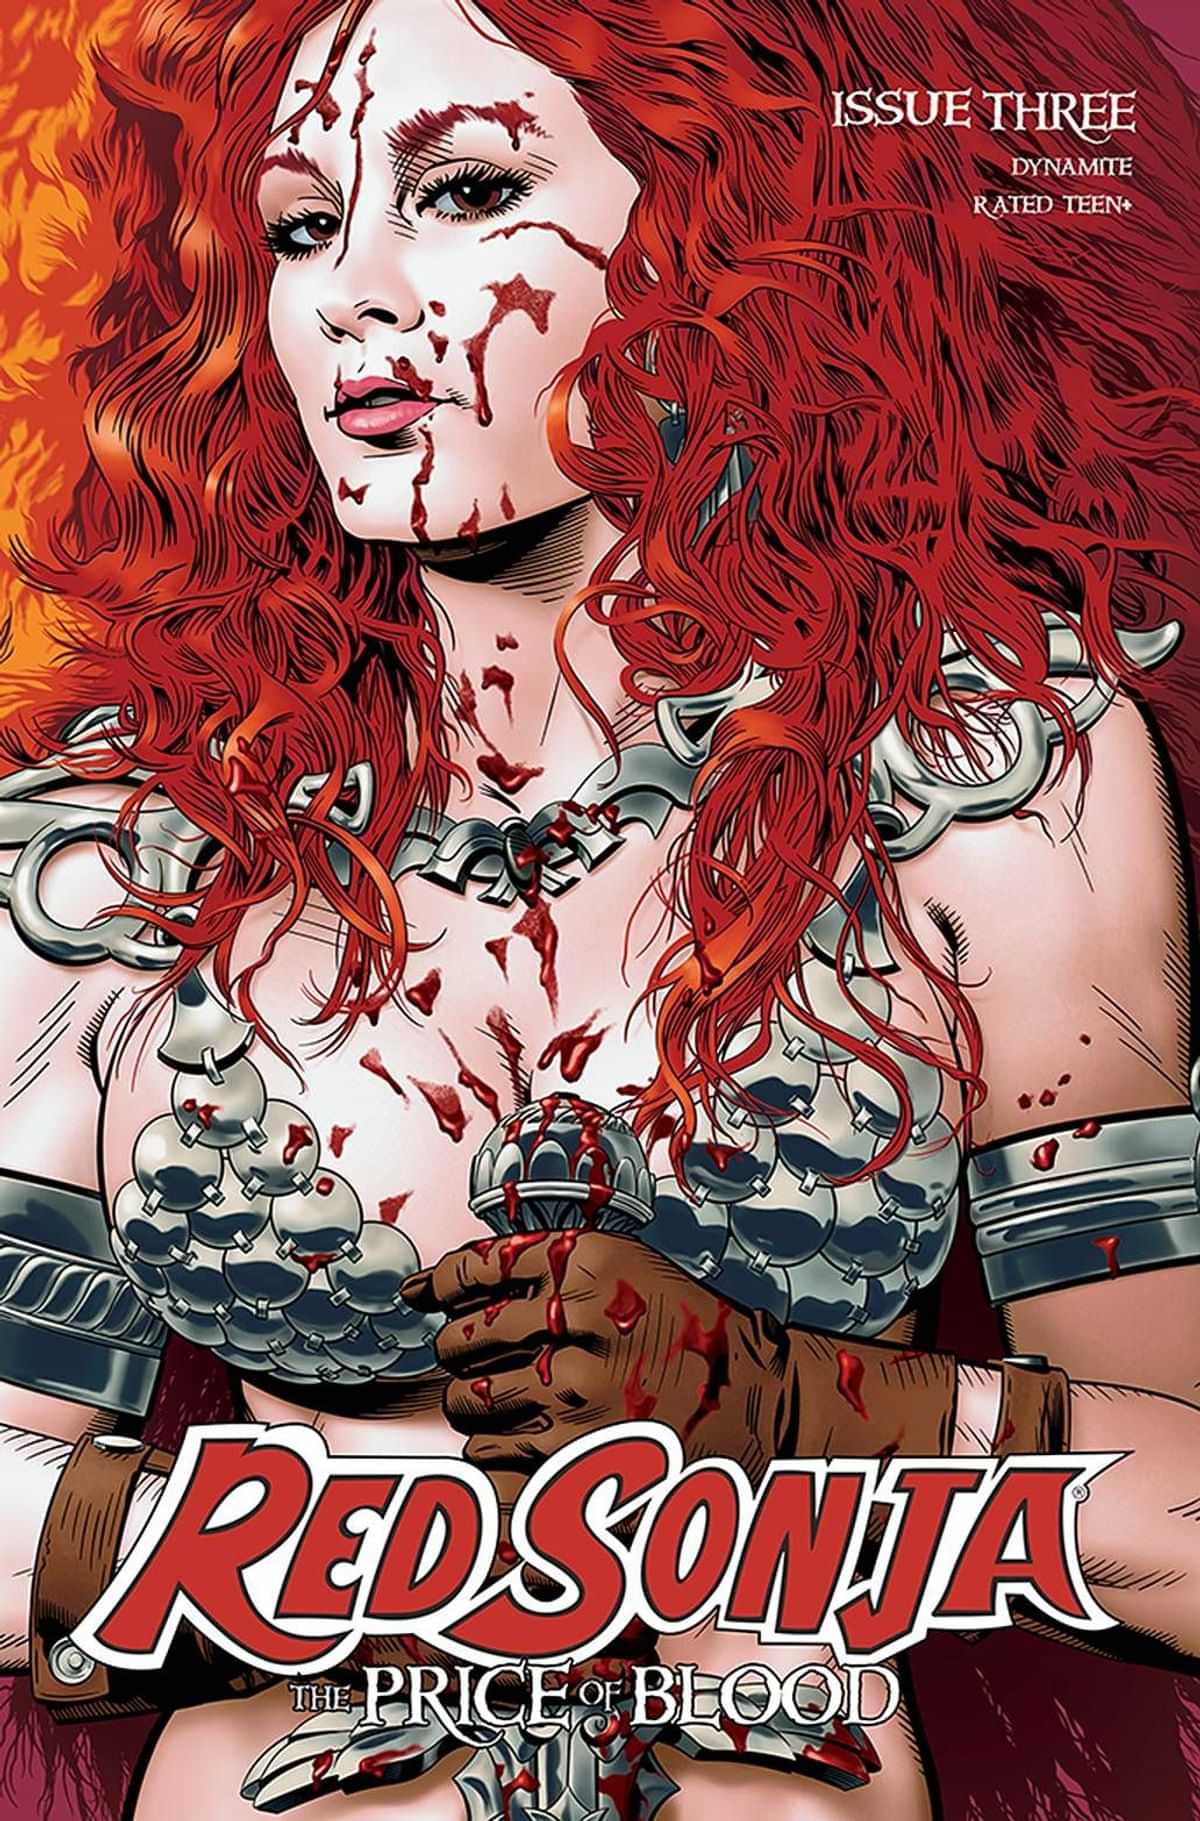 THE PRICE OF BLOOD #1B GOLDEN RED SONJA WK50 